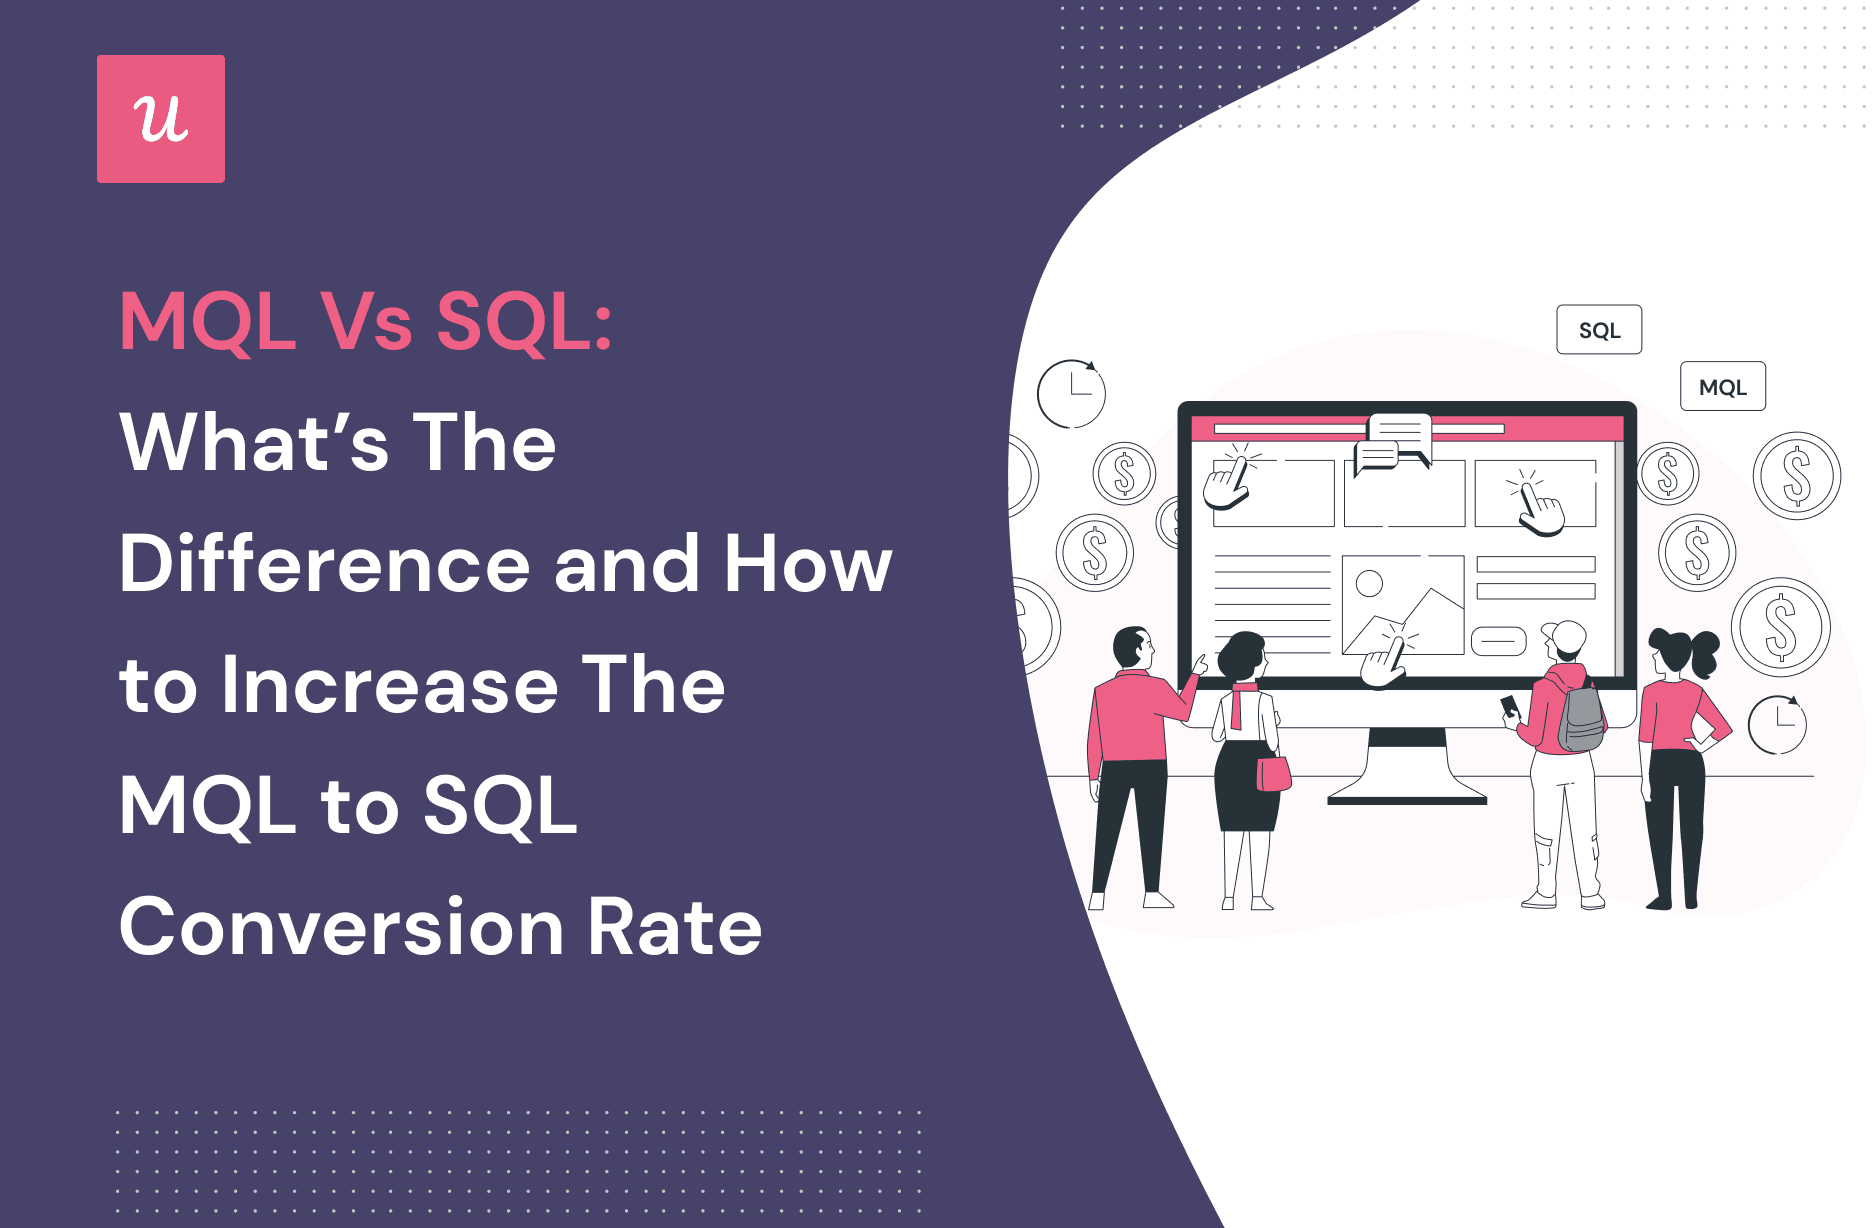 MQL vs SQL: What’s the difference and how to increase your conversion rate